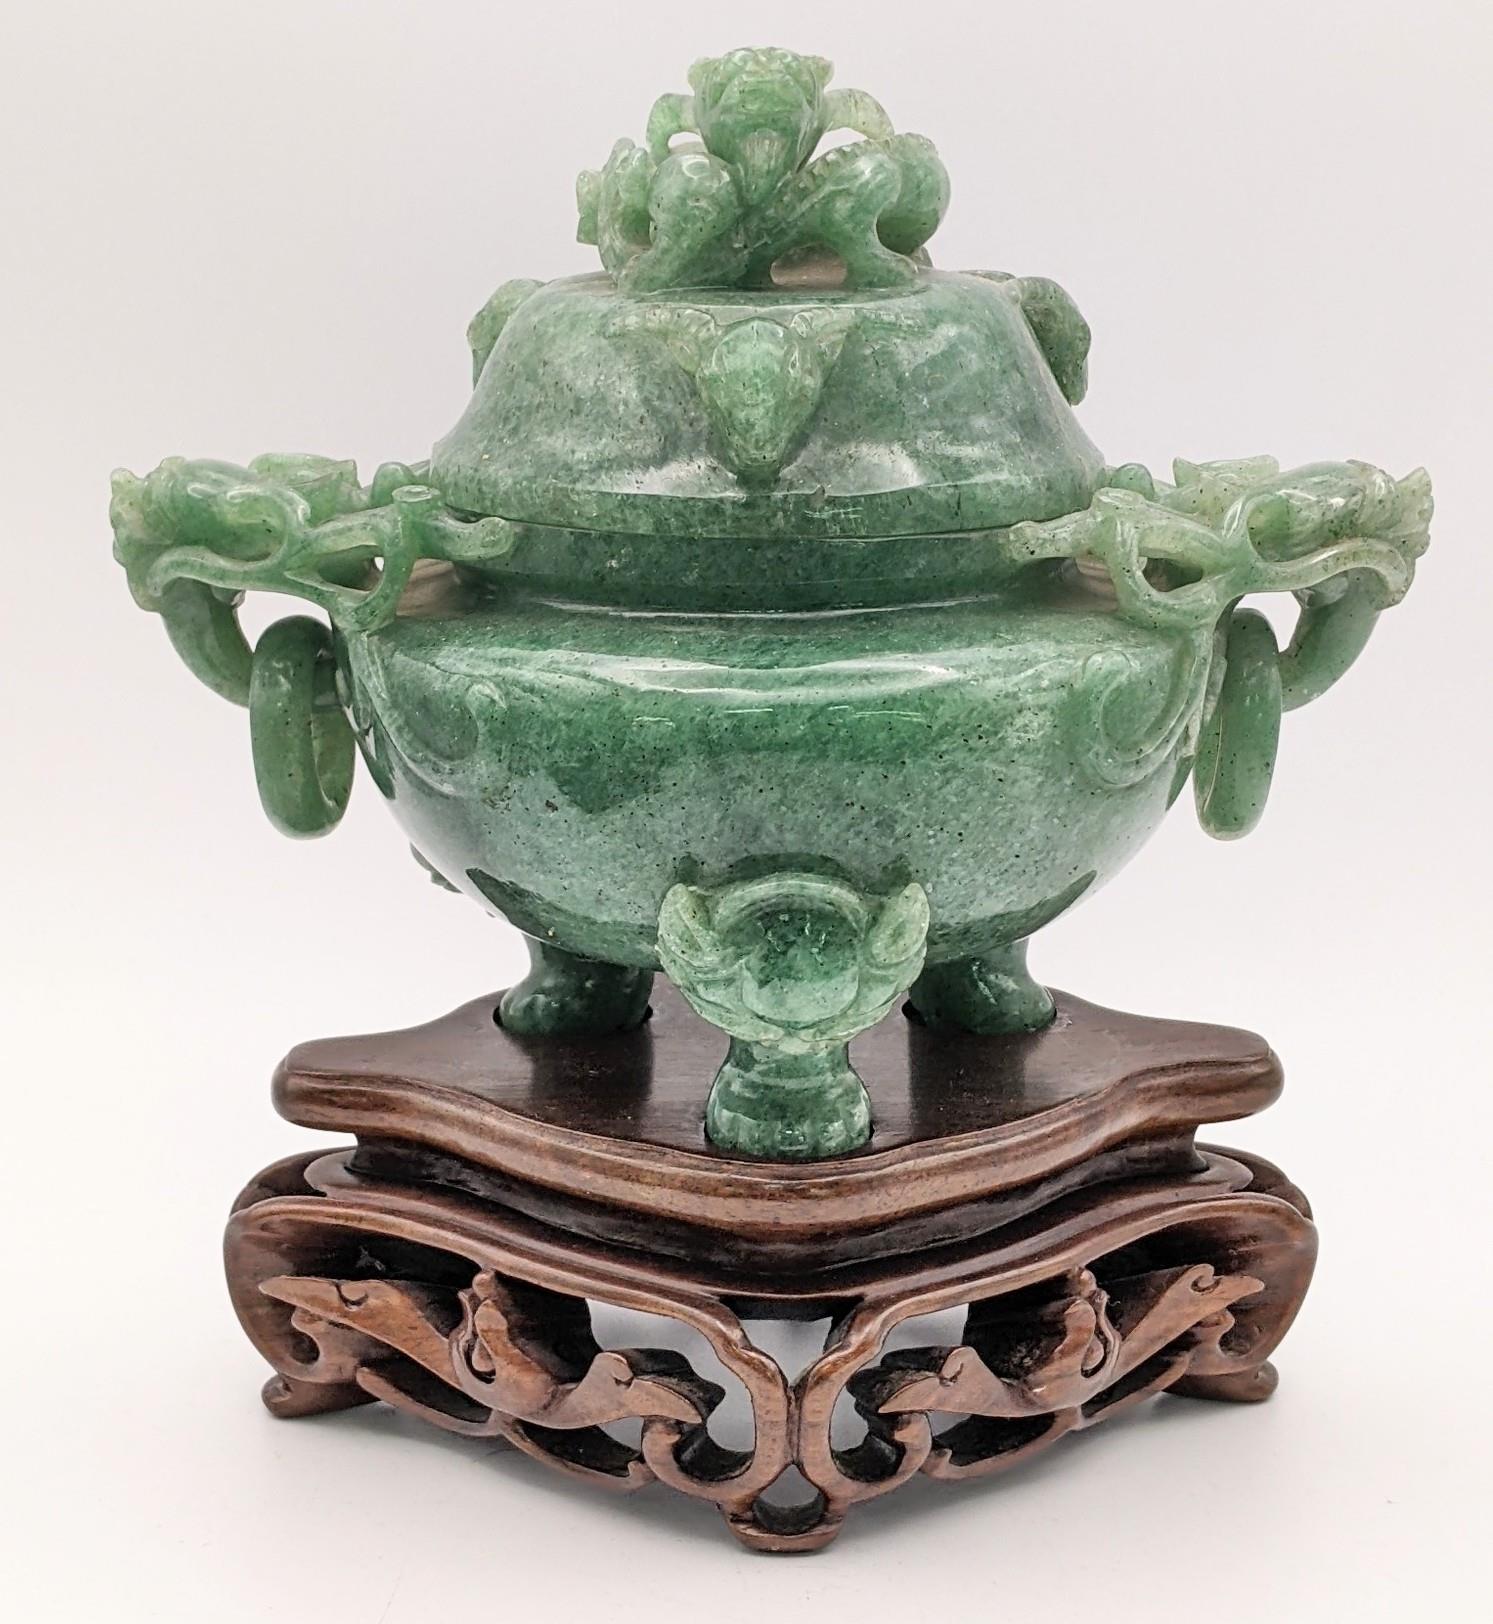 A 20th century Chinese jade censor, the lid decorated with a coiled dragon